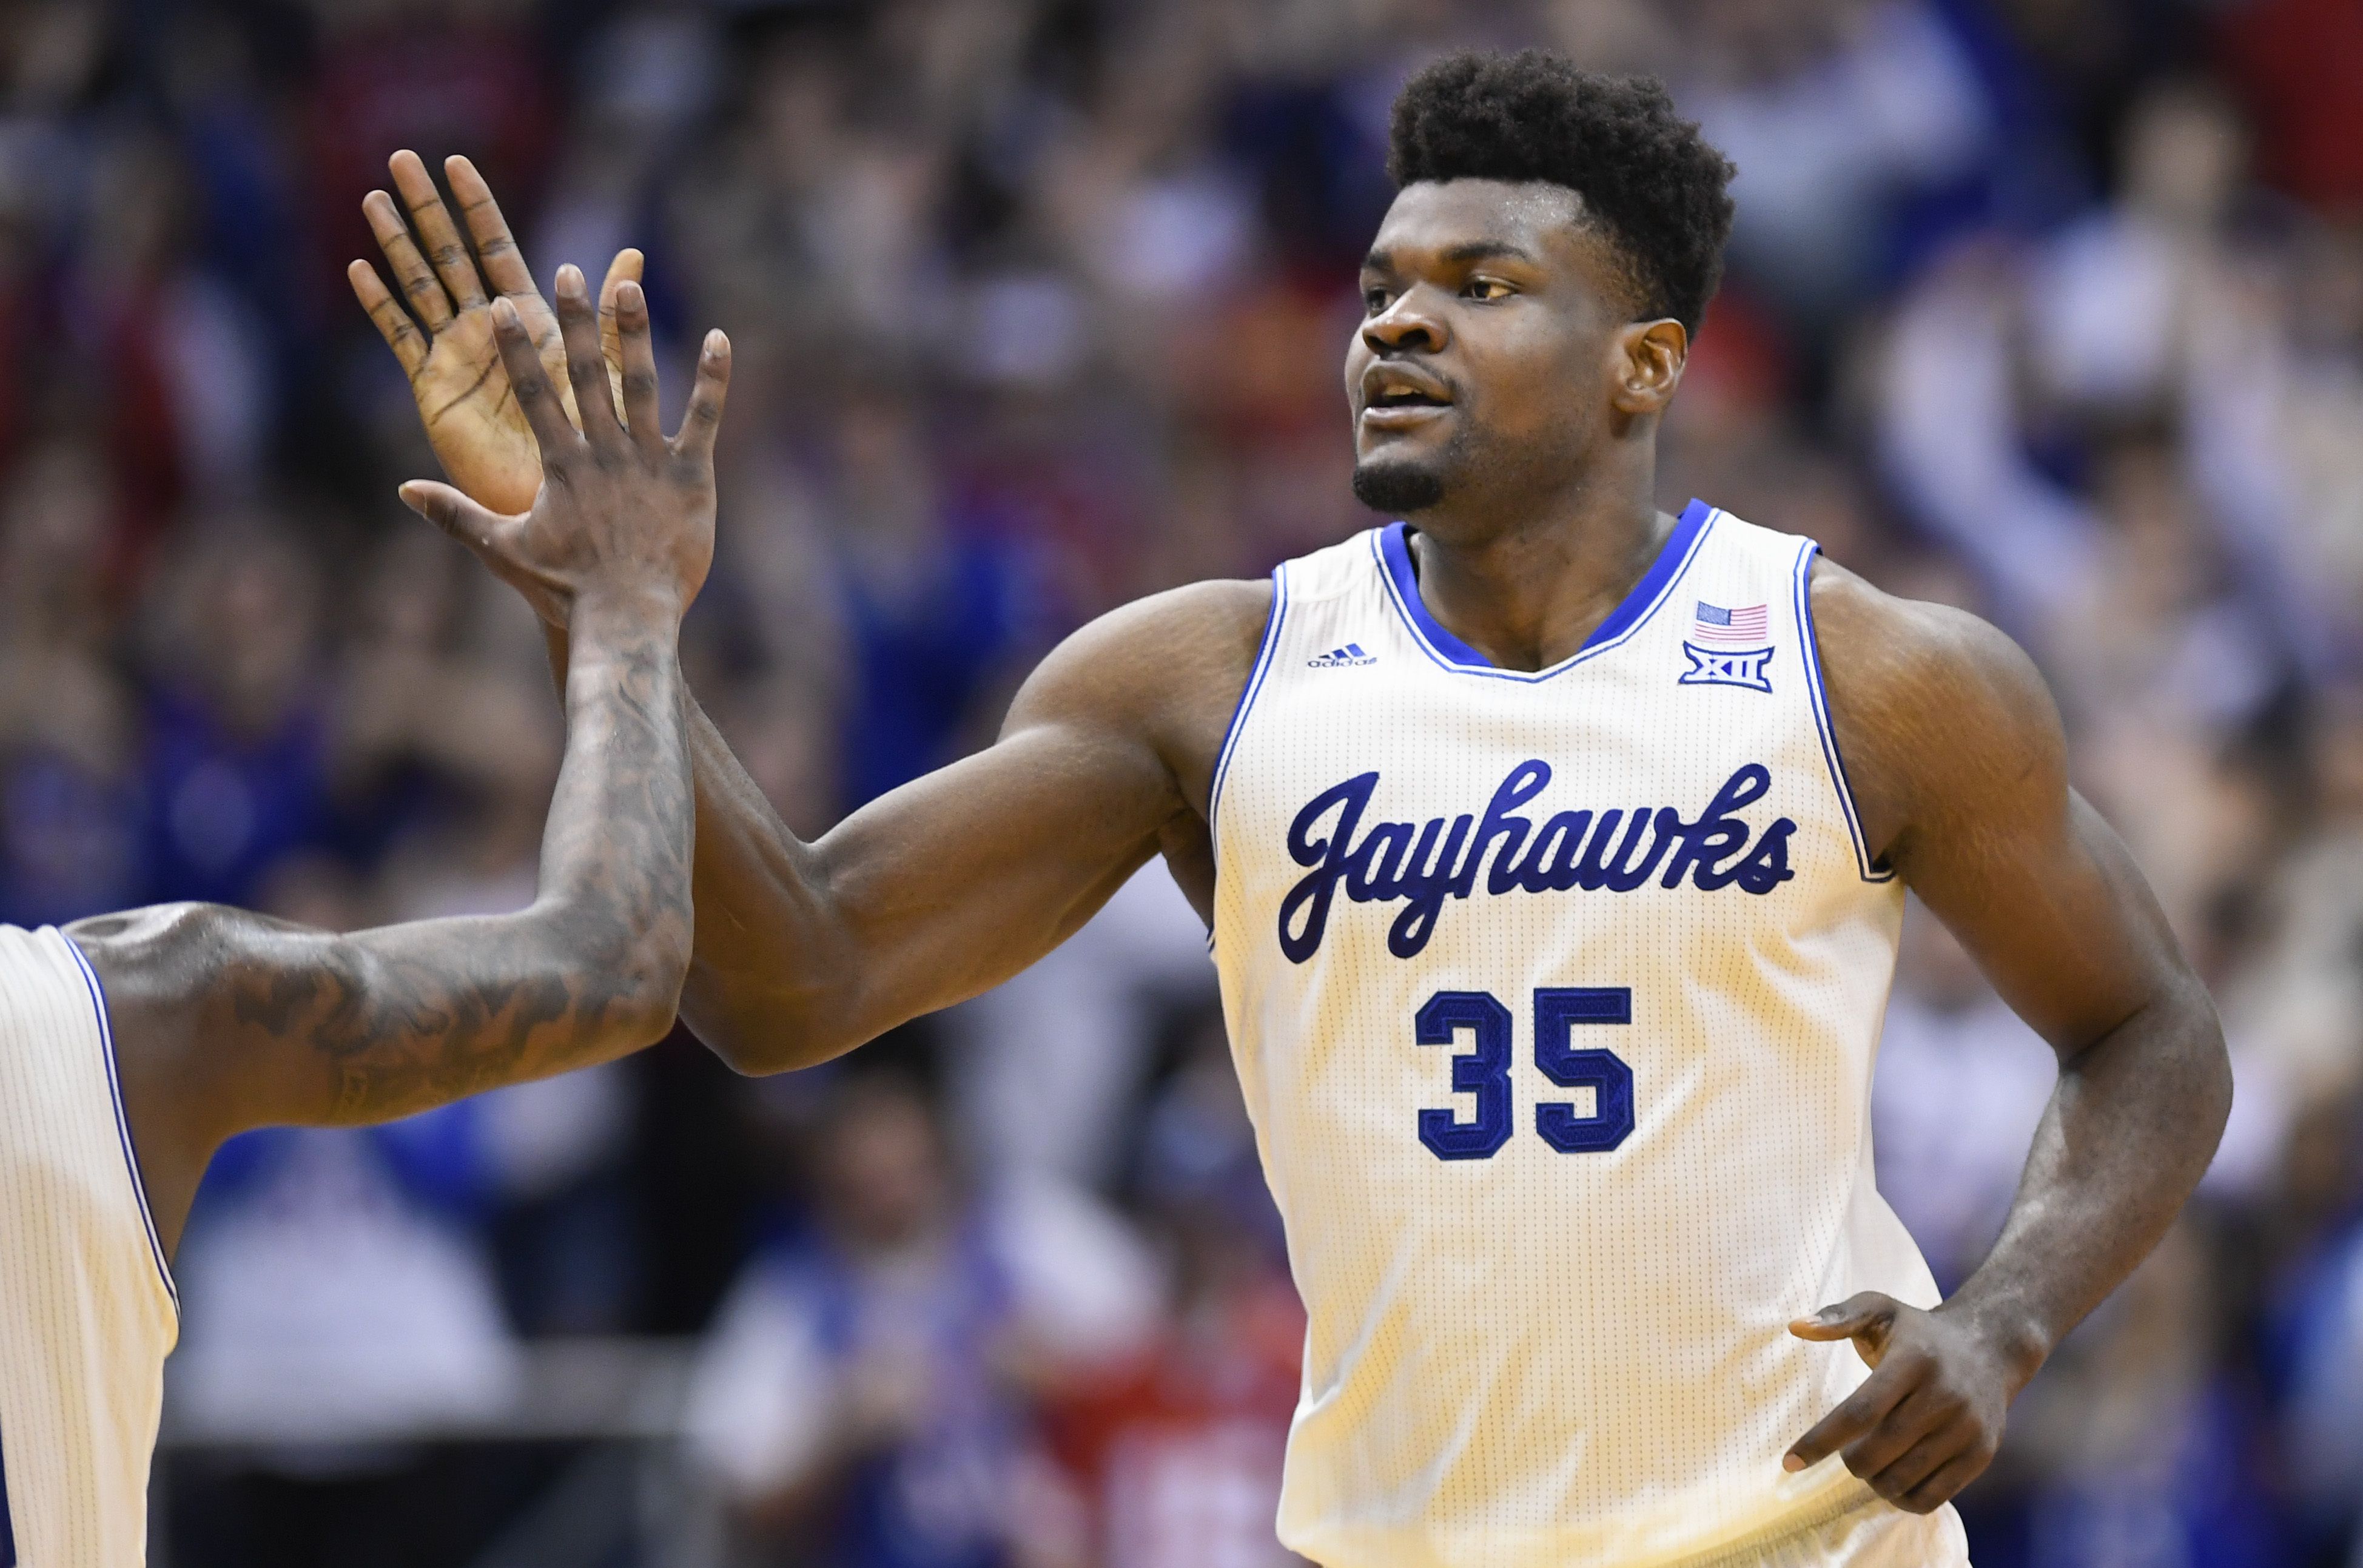 Udoka Azubuike joins the Utah Jazz with much to learn and a